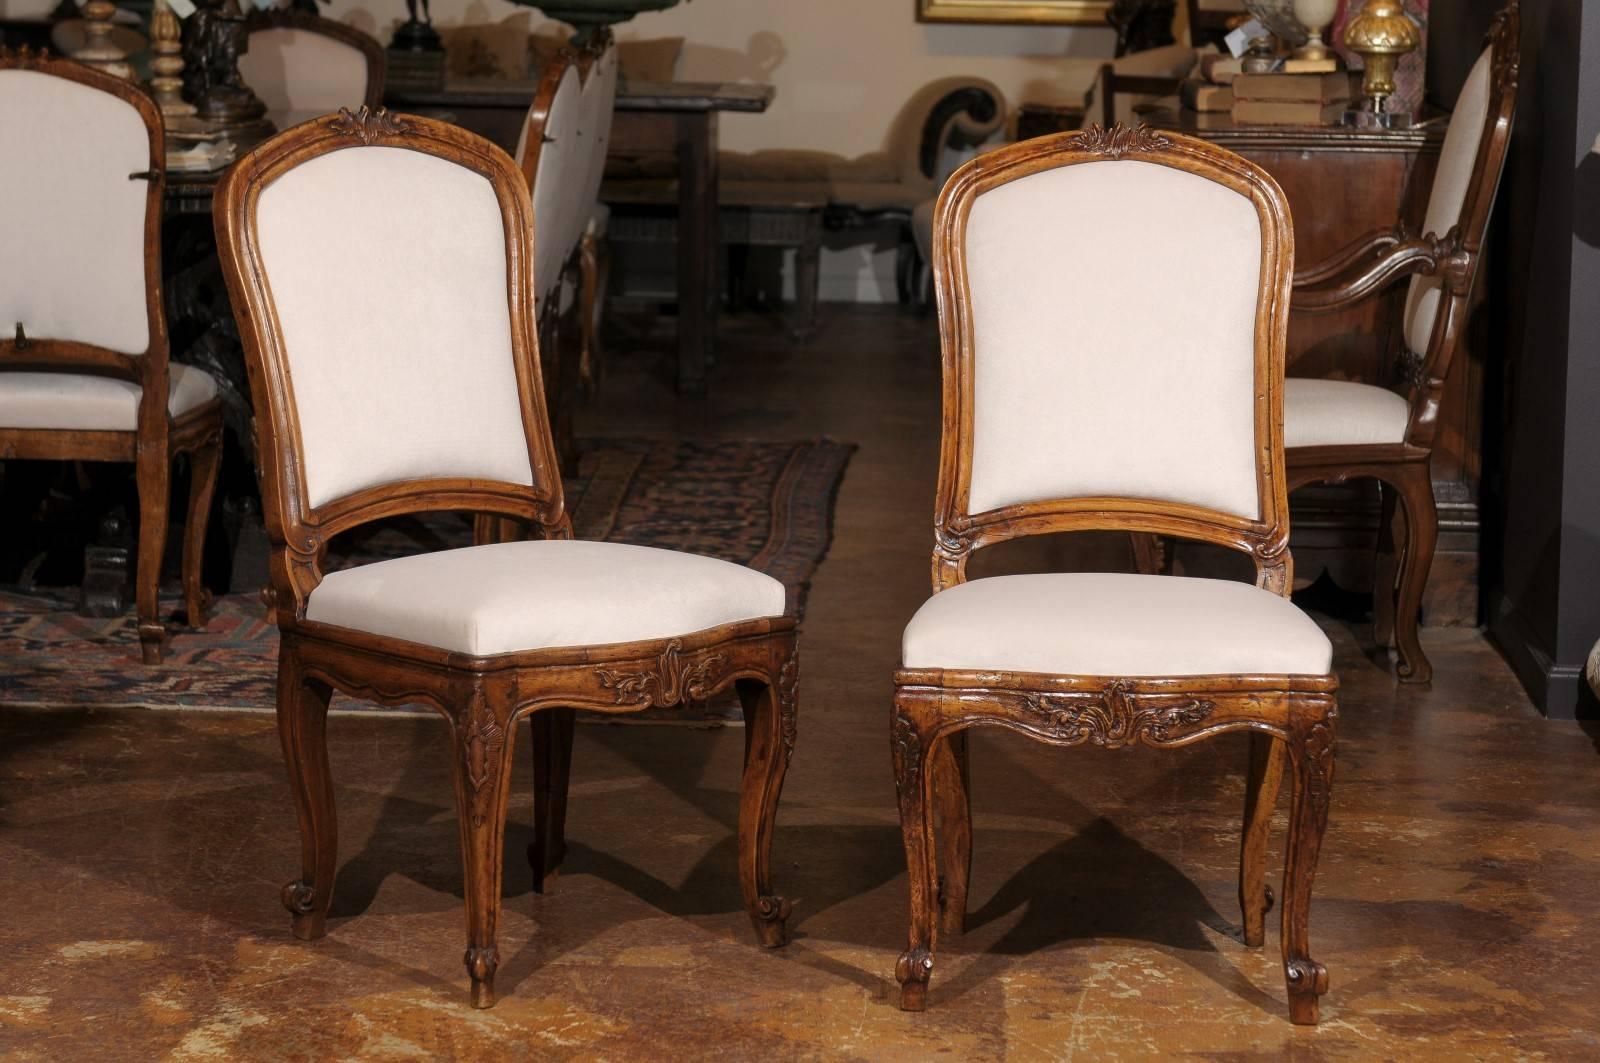 A set of 12 Italian Louis XV style wooden carved dining chairs with upholstered backs and seats, from the late 19th century. This set of Italian dining chairs features slightly slanted and carved backs with Rocaille motifs at the crest. The lower